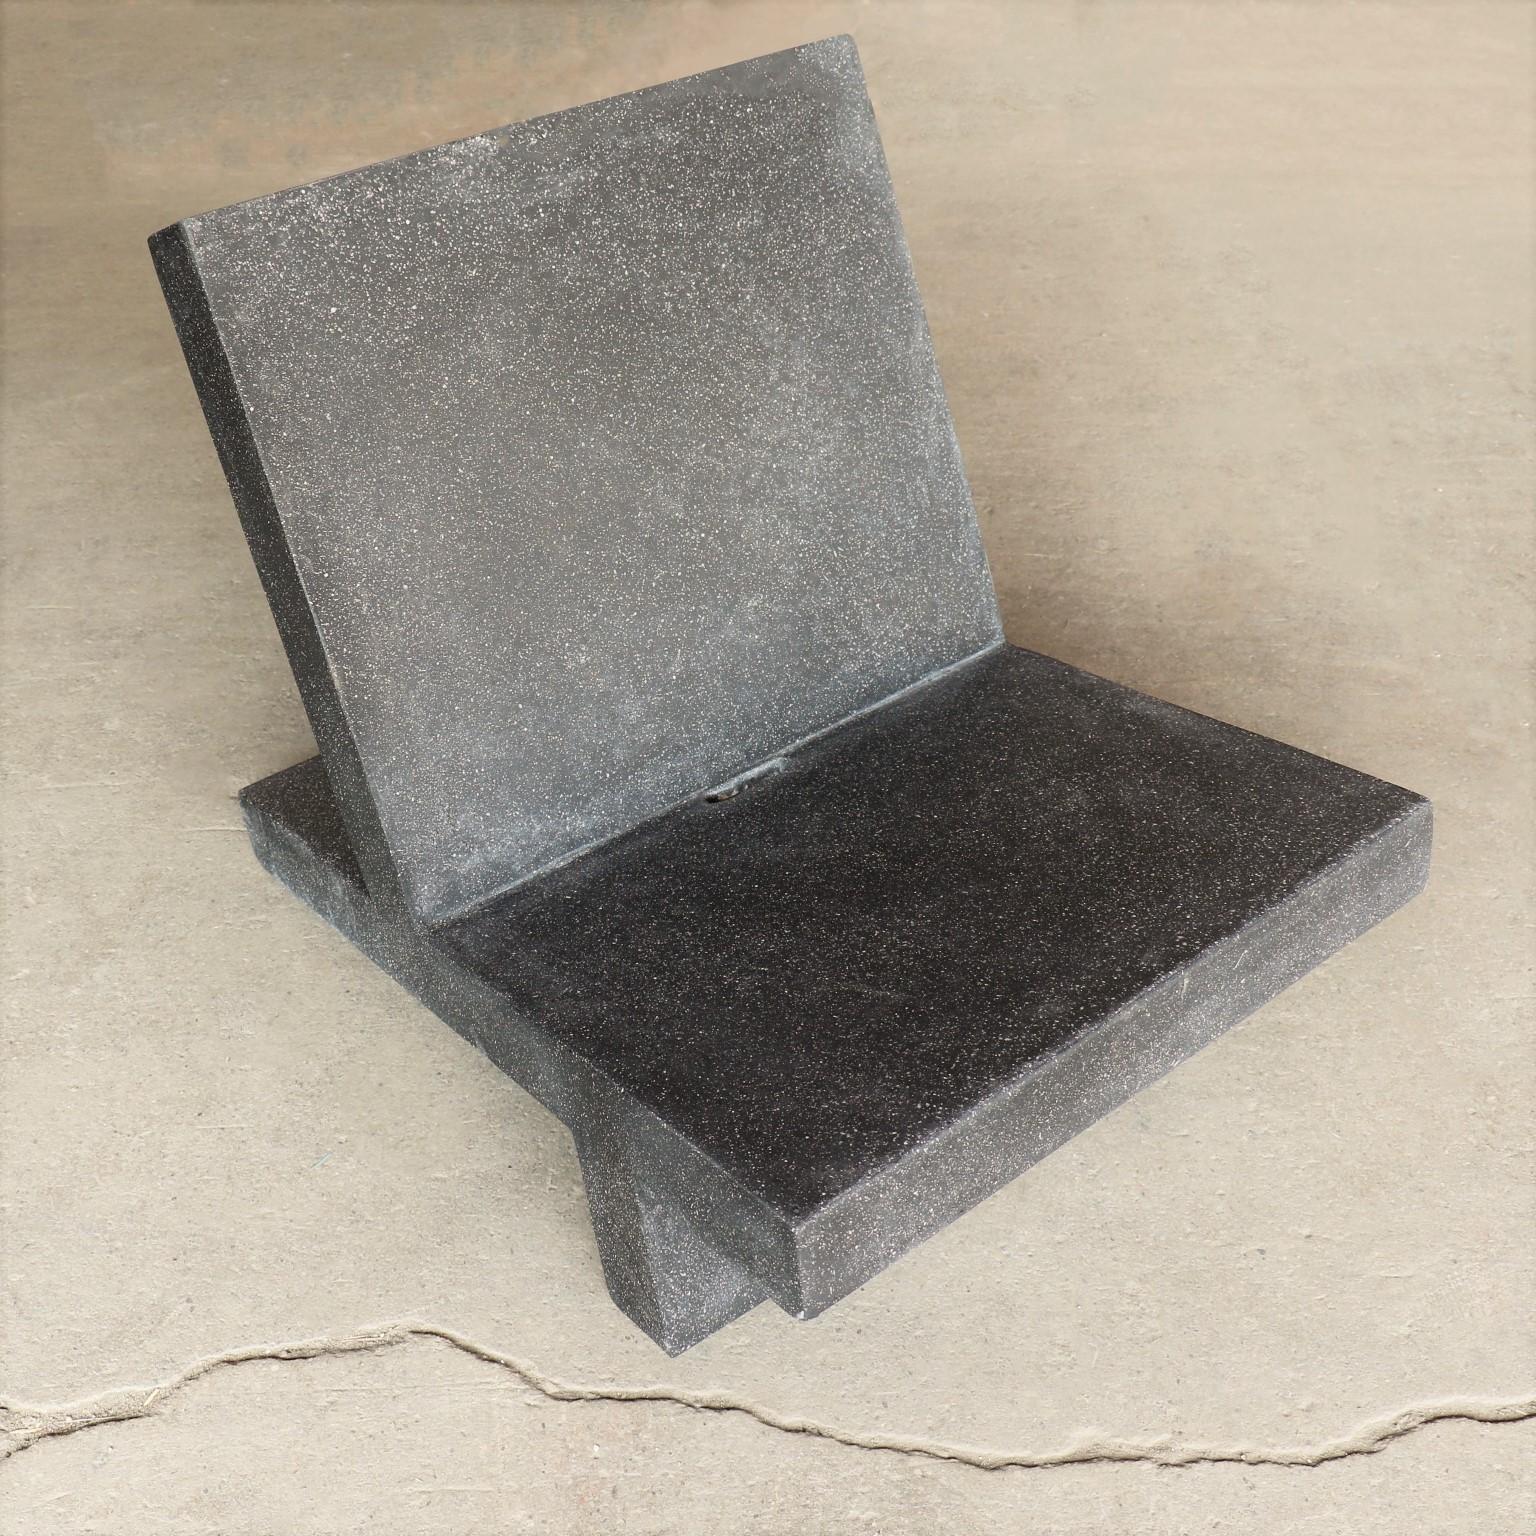 Minimalist Cast Resin 'Wavebreaker' Lounge Chair, Coal Stone Finish by Zachary A. Design For Sale